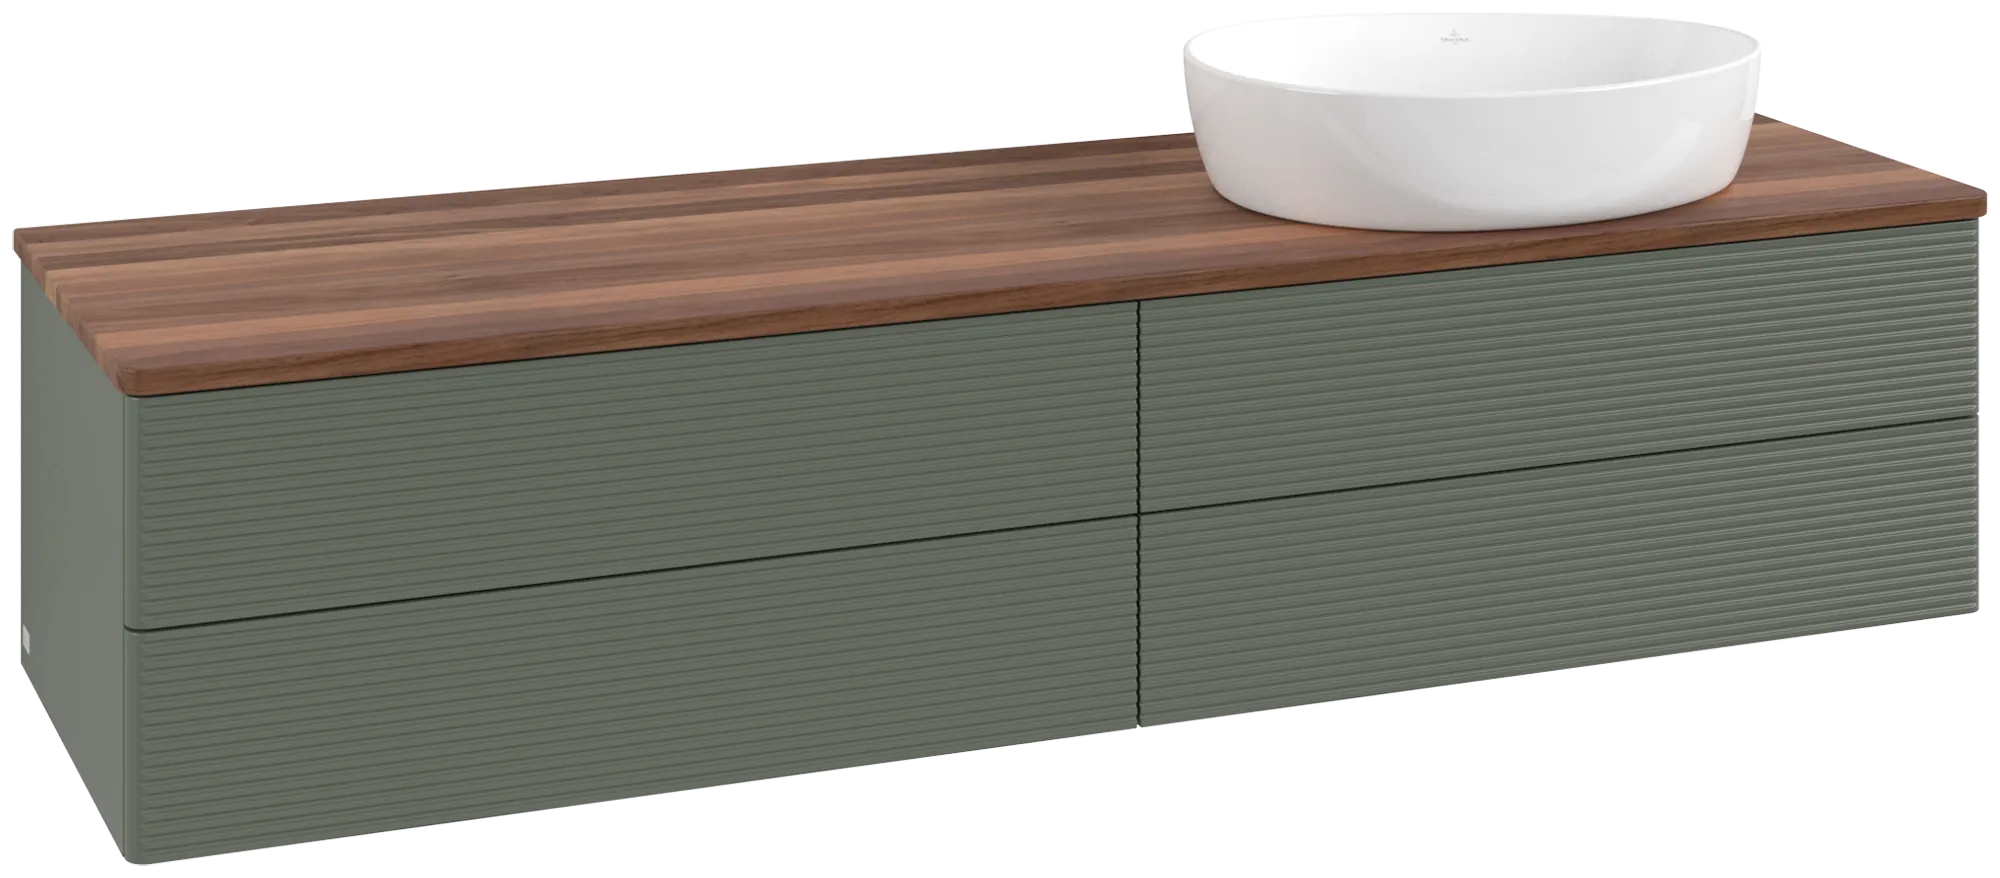 Picture of VILLEROY BOCH Antao Vanity unit, 4 pull-out compartments, 1600 x 360 x 500 mm, Front with grain texture, Leaf Green Matt Lacquer / Warm Walnut #K27112HL